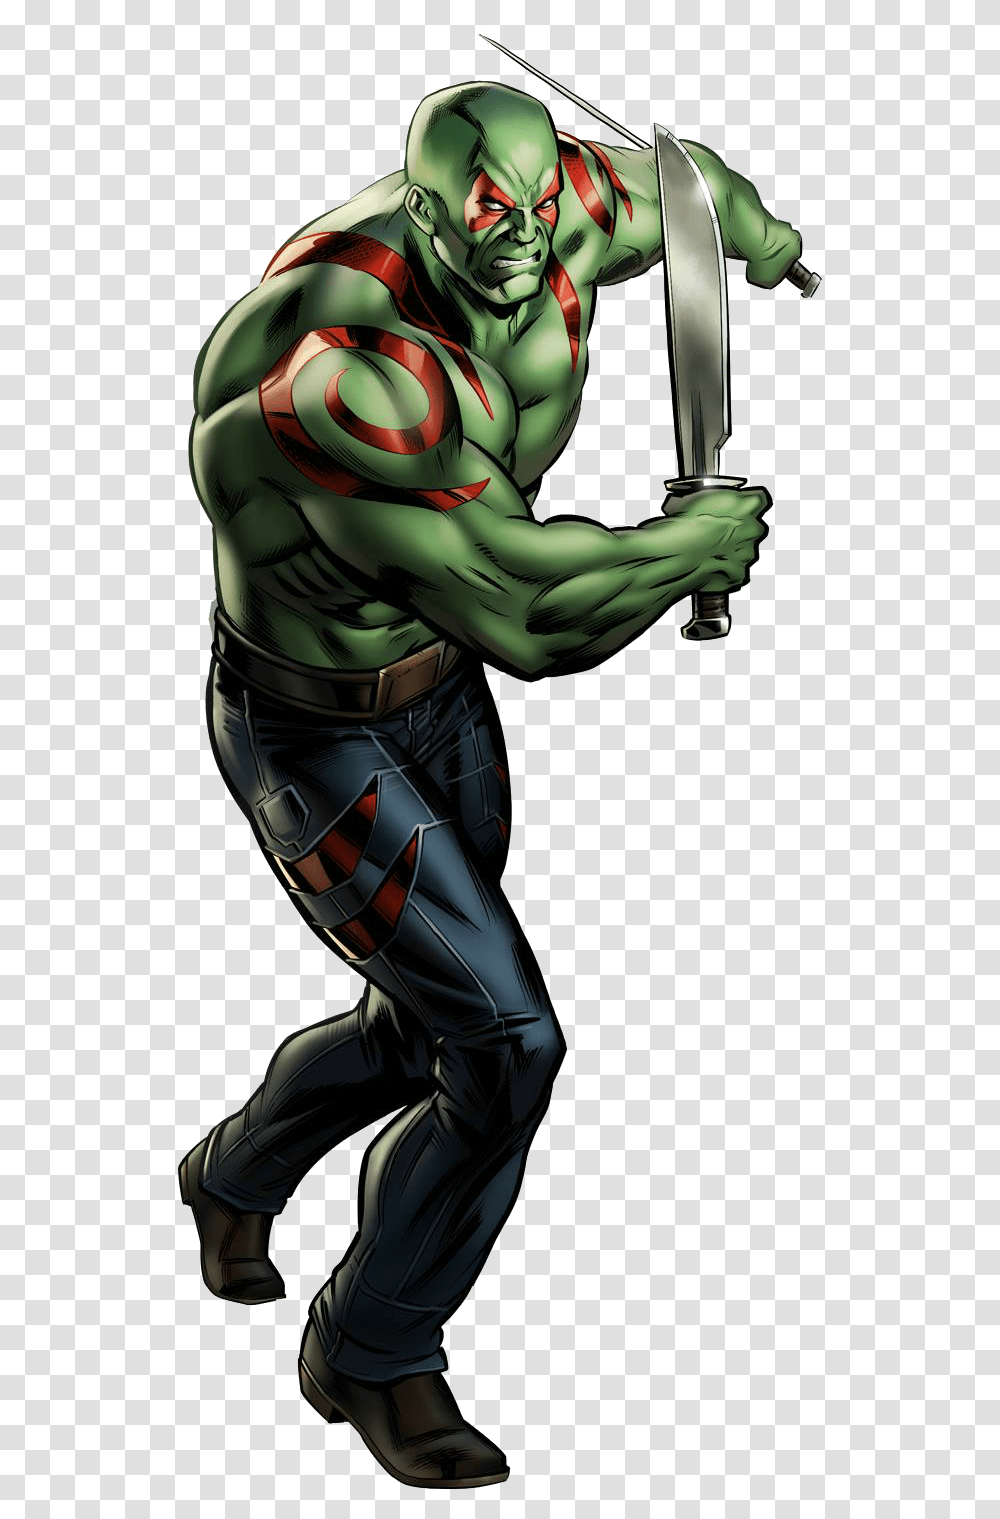 Drax Free Download Drax Marvel Avengers Alliance, Hand, Person, Helmet Transparent Png